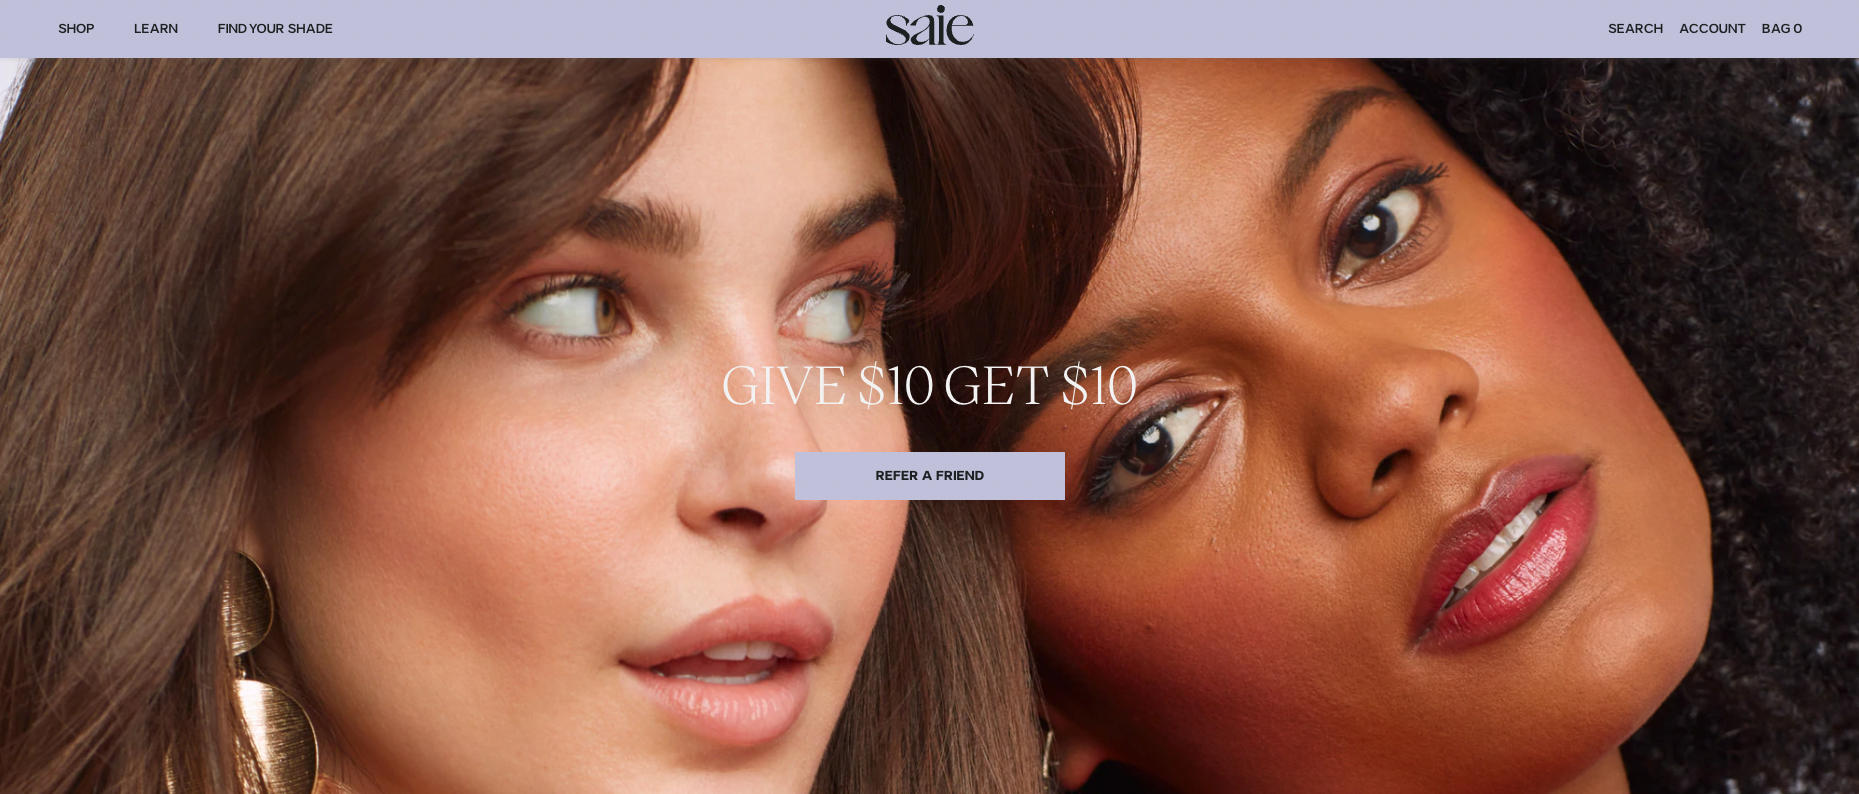 Screenshot of the Saie refer a friend landing page showing Saie's referral incentive on top of two women wearing Saie products